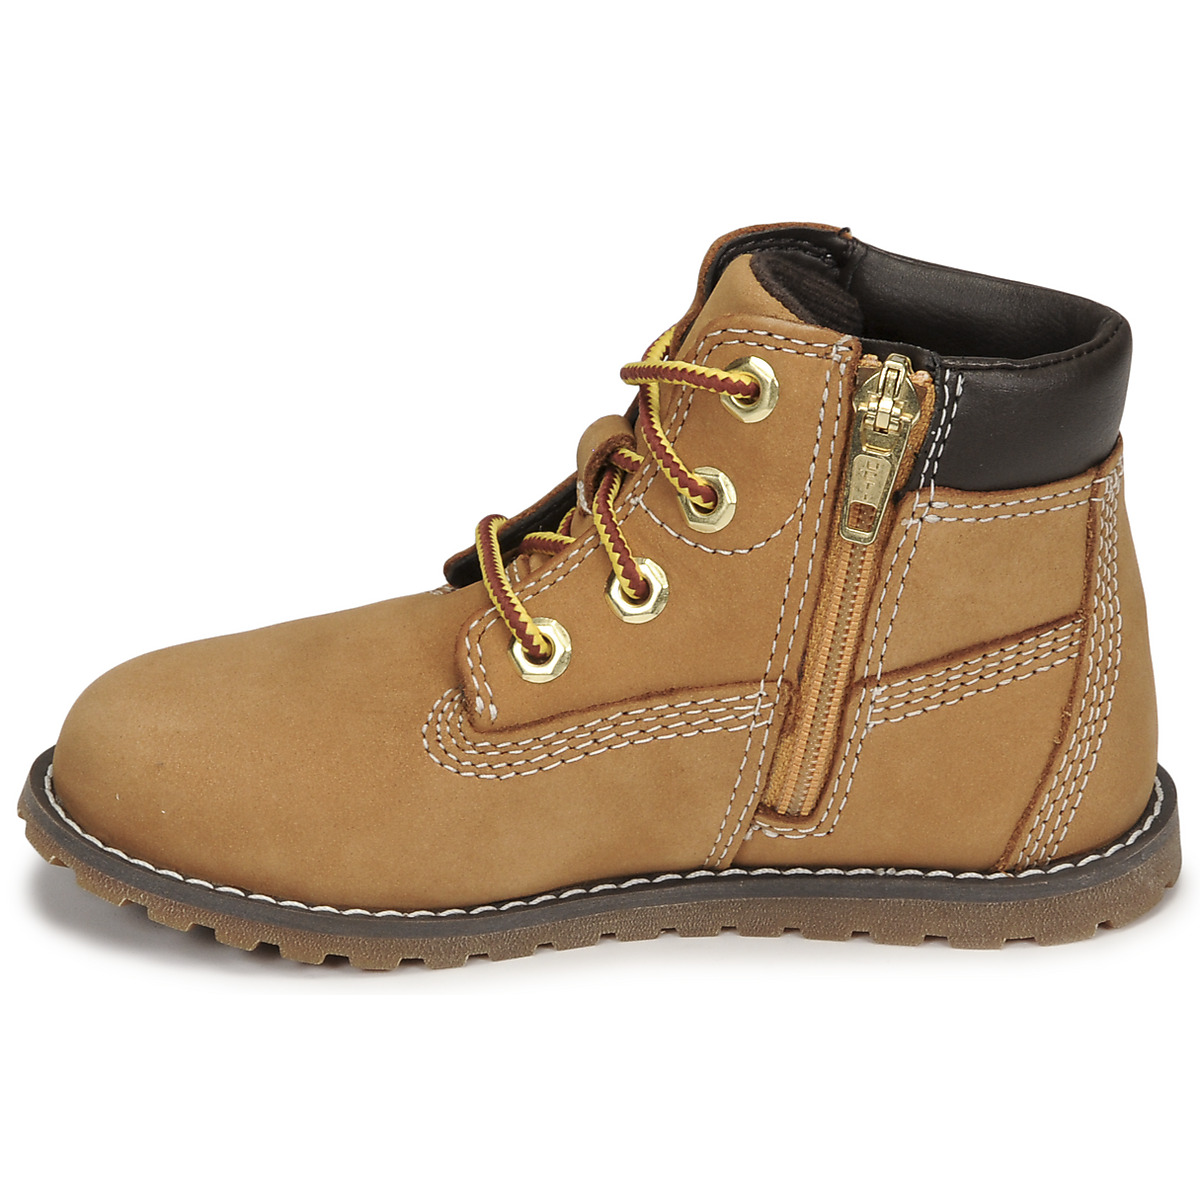 Timberland Marron POKEY PINE 6IN BOOT nXTeS0Dt